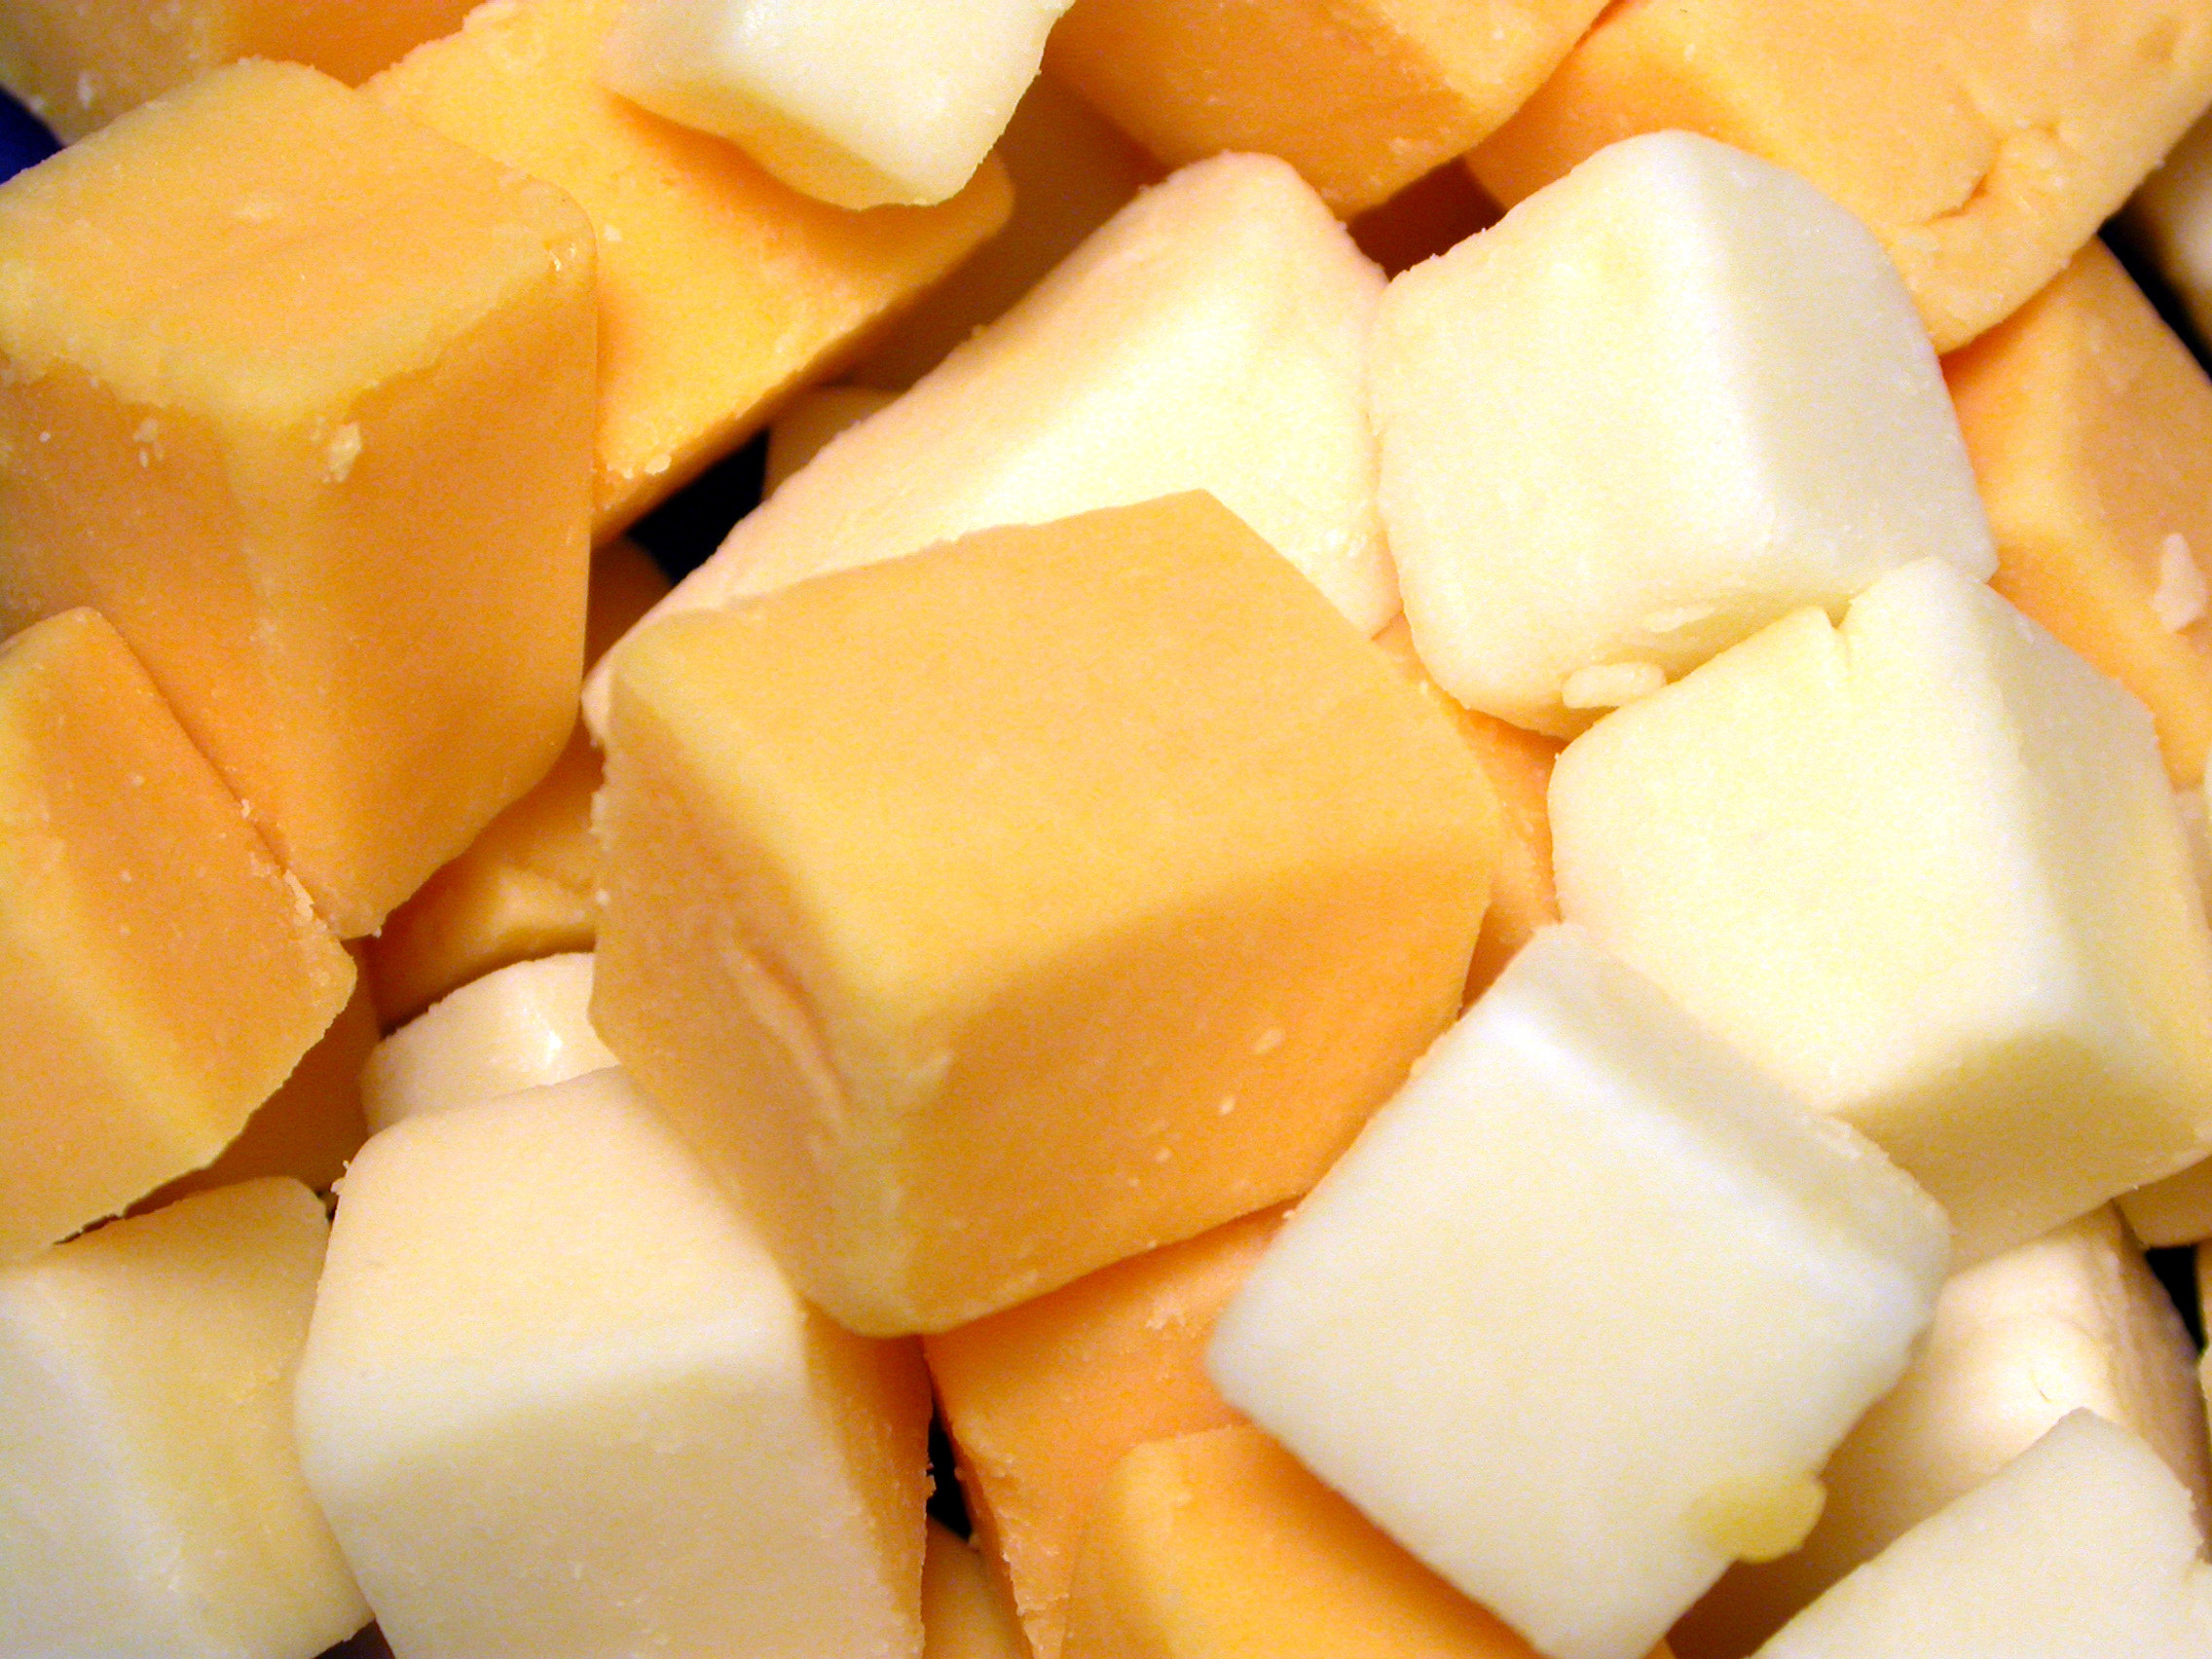 Cubes of cheese